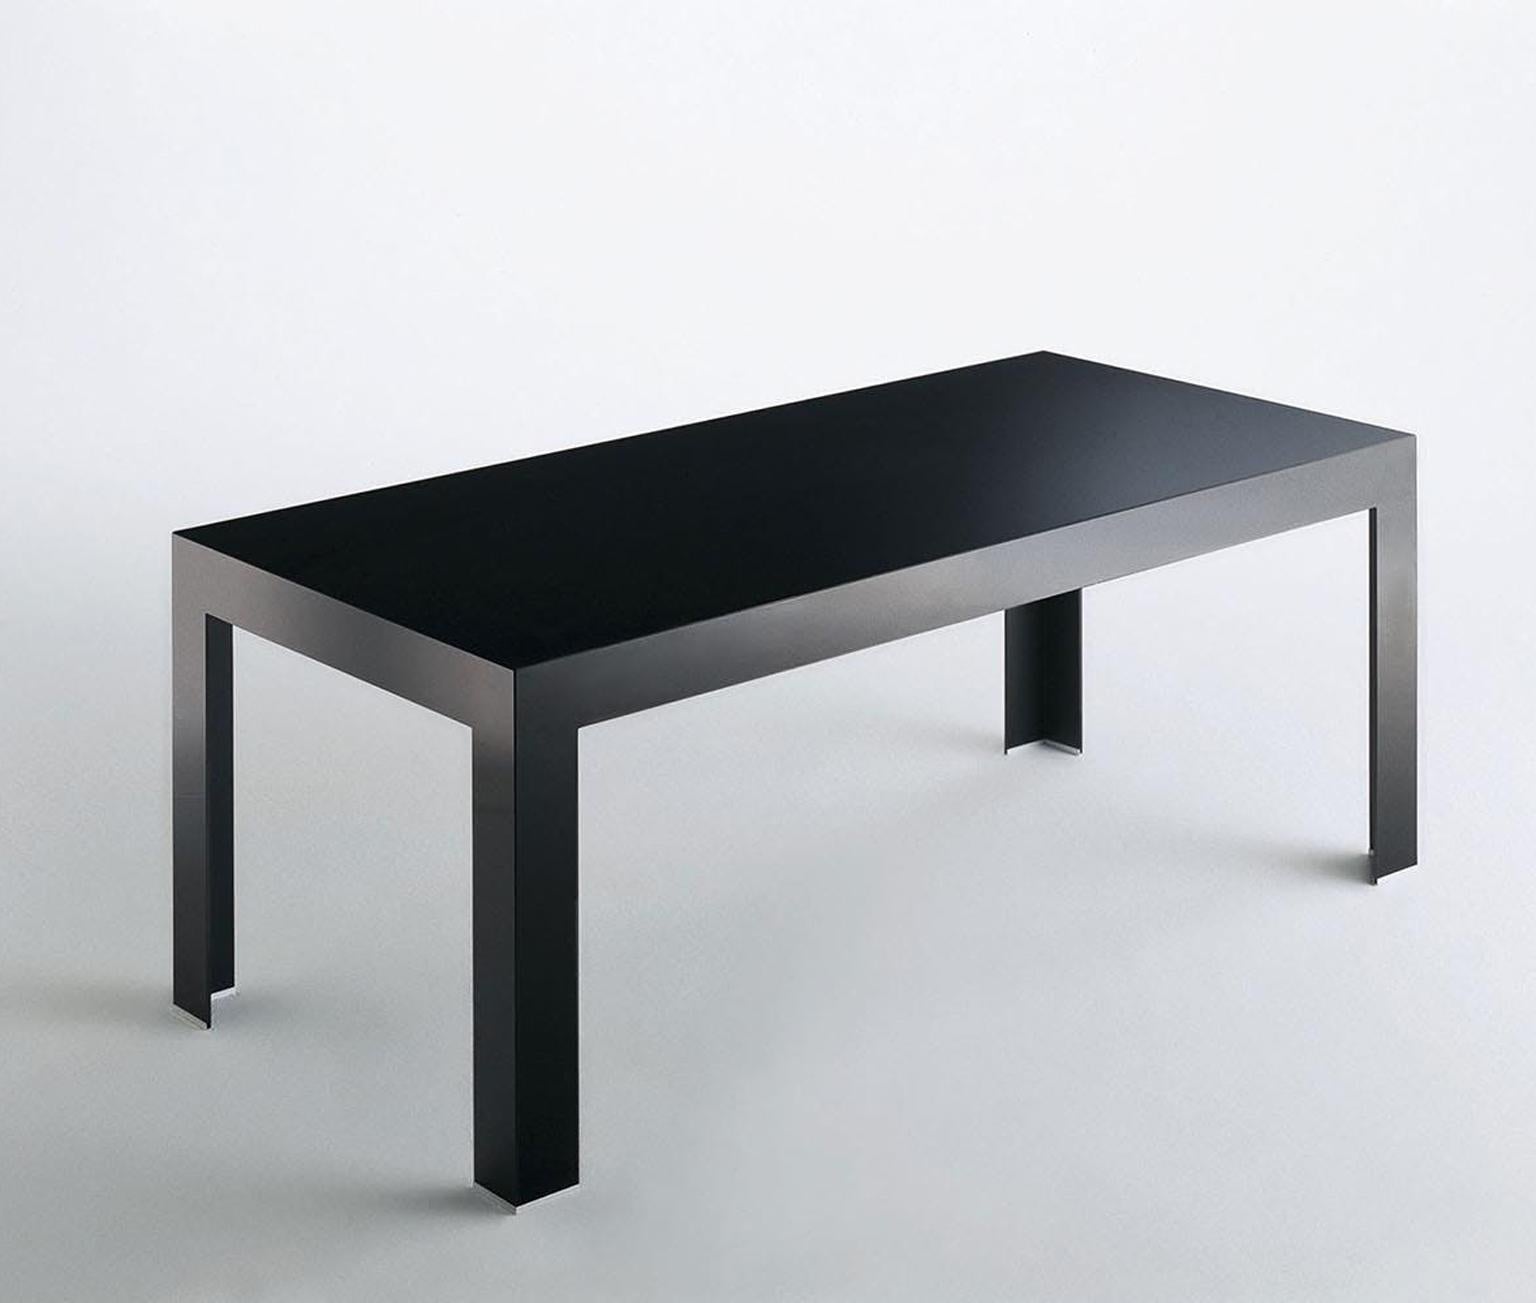 Italian contemporary design black glass dining table, fully made in Italy.

The principal features of this beautiful and very elegant table are: pureness of its shape, sobriety and sophisticated working techniques. The crystal panels are welded